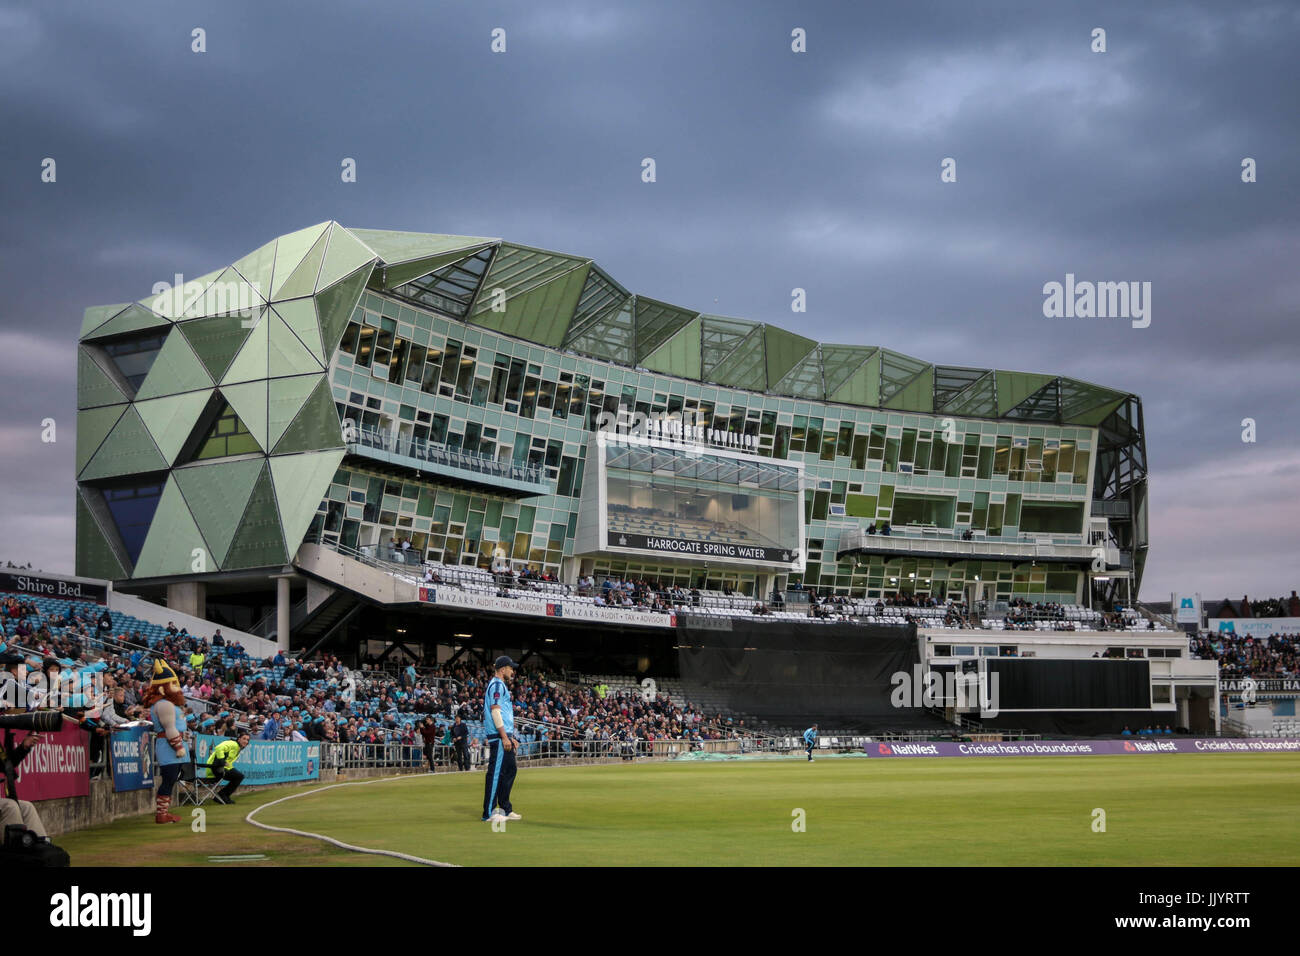 General view of Headingley Cricket ground during the Natwest T20 Blast game between Yorkshire County Cricket Club v Warwickshire County Cricket Club on Friday 21 July 2017. Photo by Mark P Doherty. Stock Photo